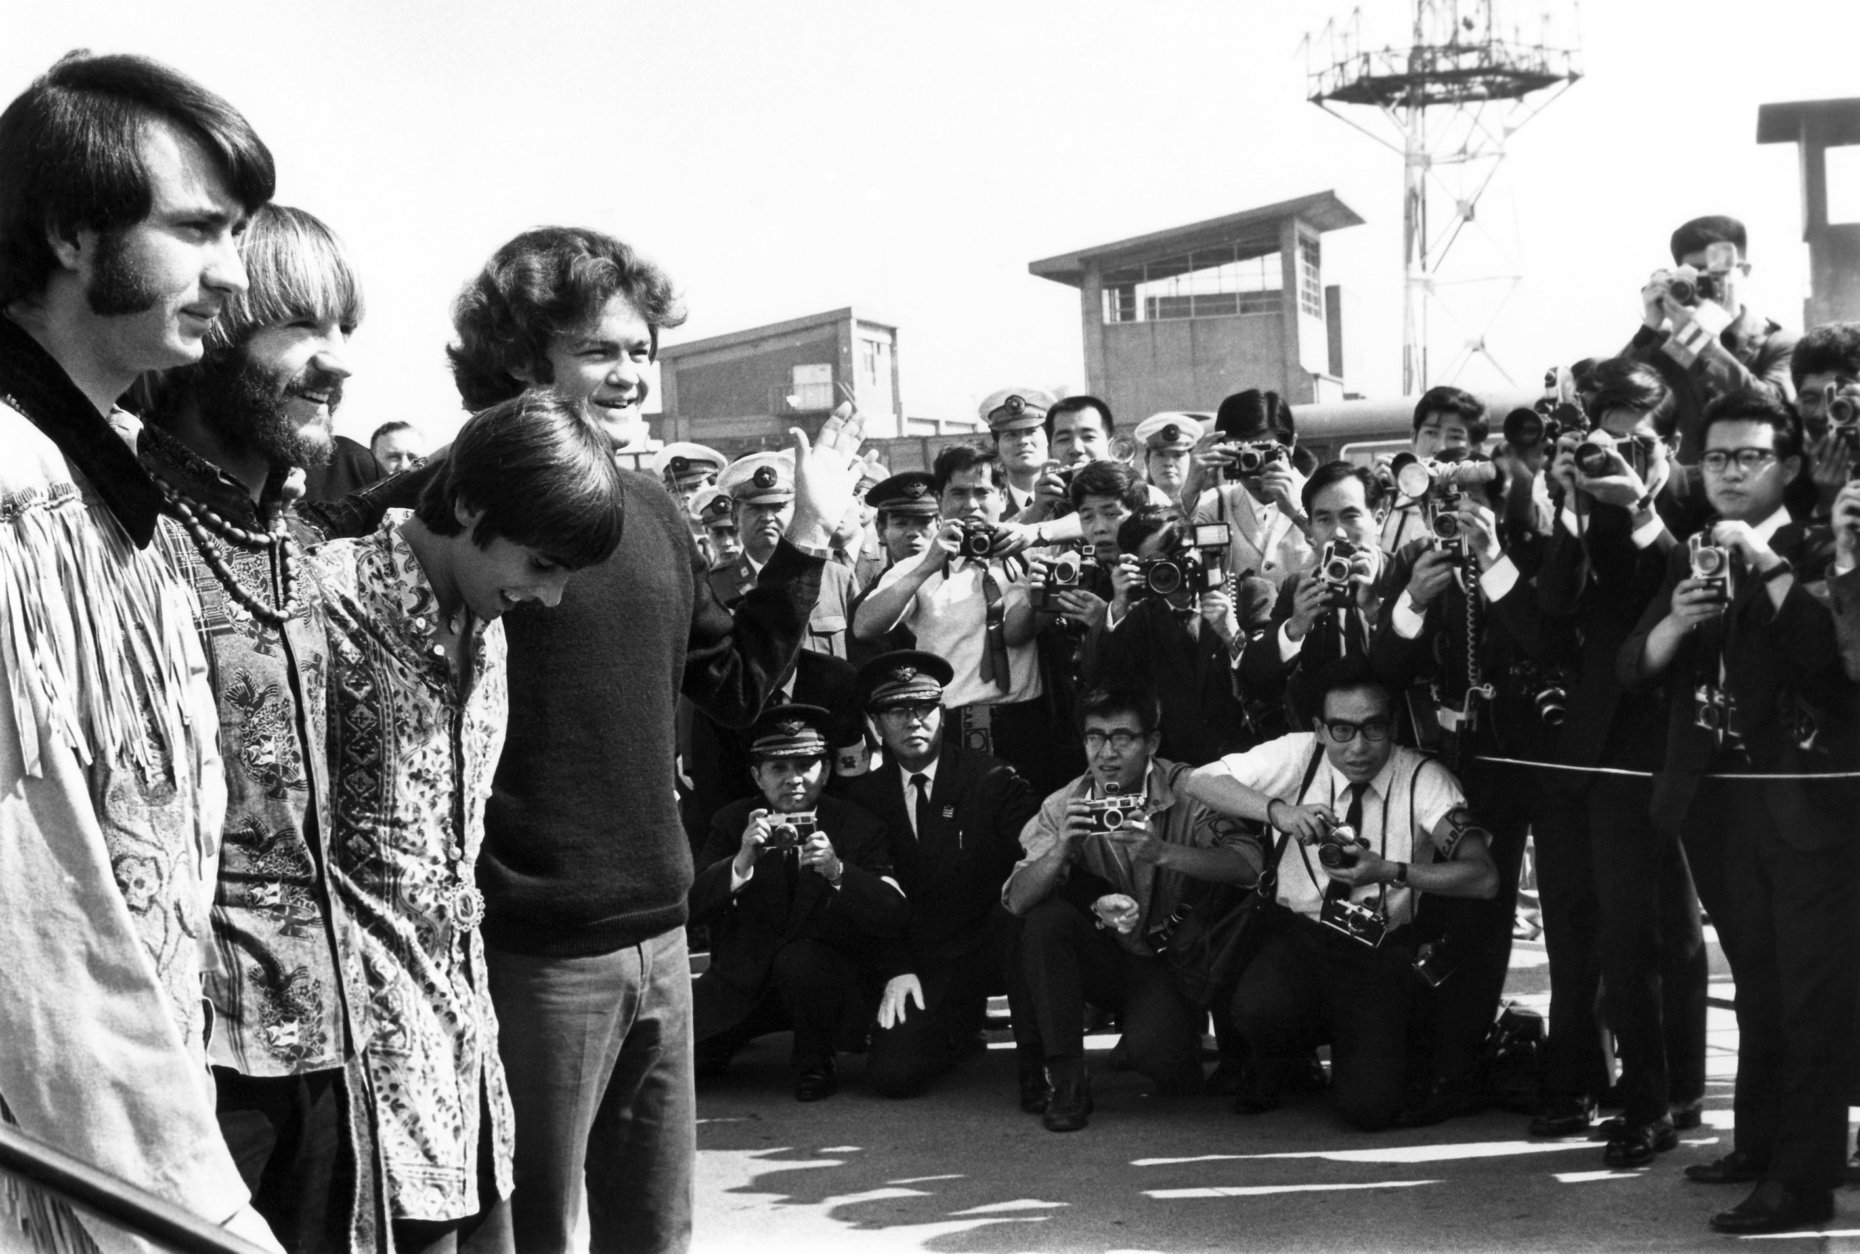 The pop musical group, The Monkees, arrived at Tokyo International Airport Sept. 30, 1968 for the performances in Tokyo, Kyoto and Osaka. About 1,000 Japanese fans, mostly teen aged girls gathered at the airport to see The Monkees. From right Micky Dolenz, Davy Jones, Peter Tork, Mike Nesmith. About 700 Japanese police surrounded the airport to protect Monkees from crowd but no mob scene. (AP Photo)